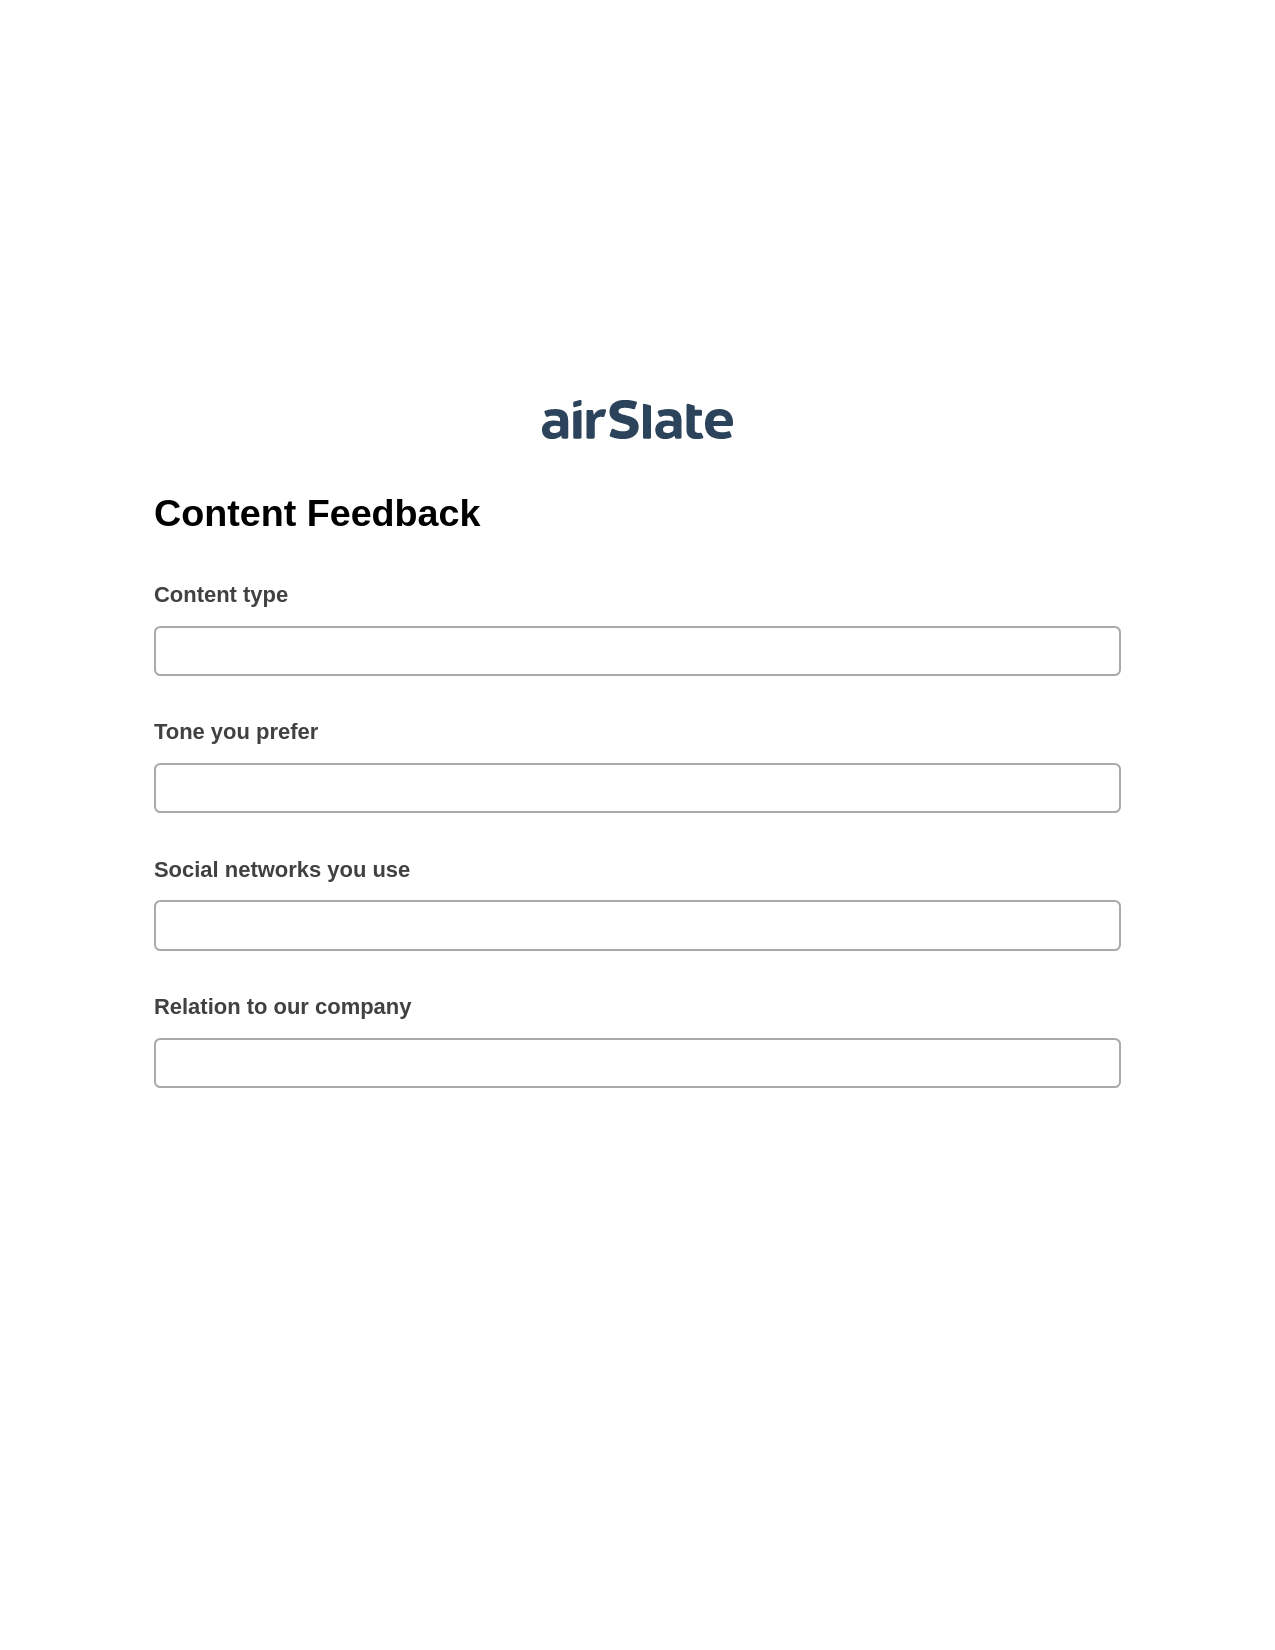 Content Feedback Pre-fill Dropdowns from MySQL Bot, Lock the slate bot, Export to Smartsheet